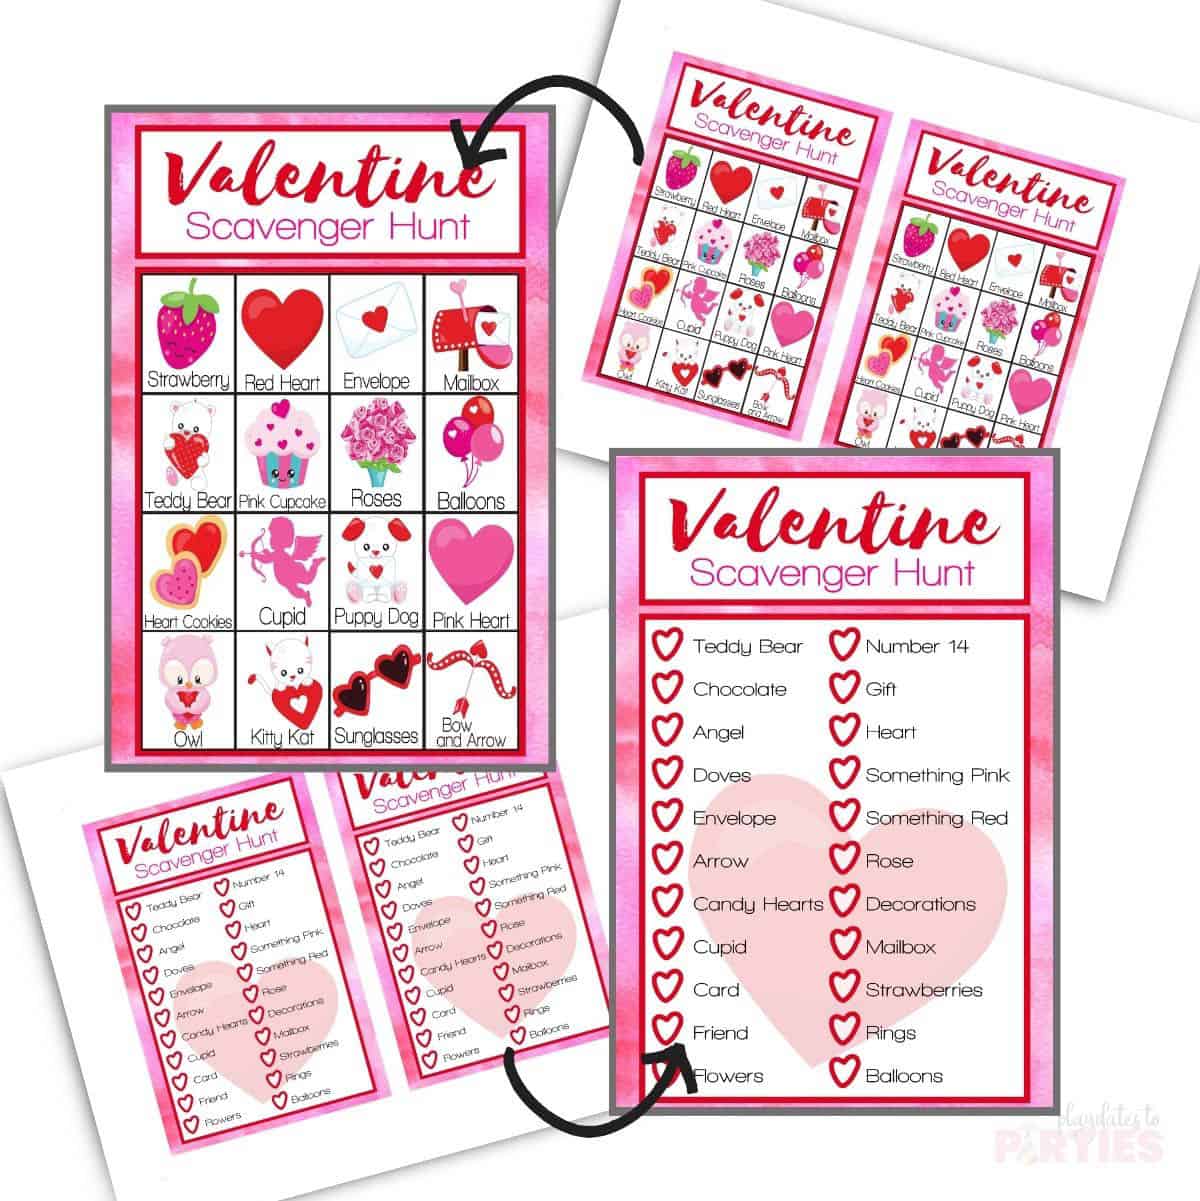 Valentine Scavenger Hunt pages with close ups of the individual cards.